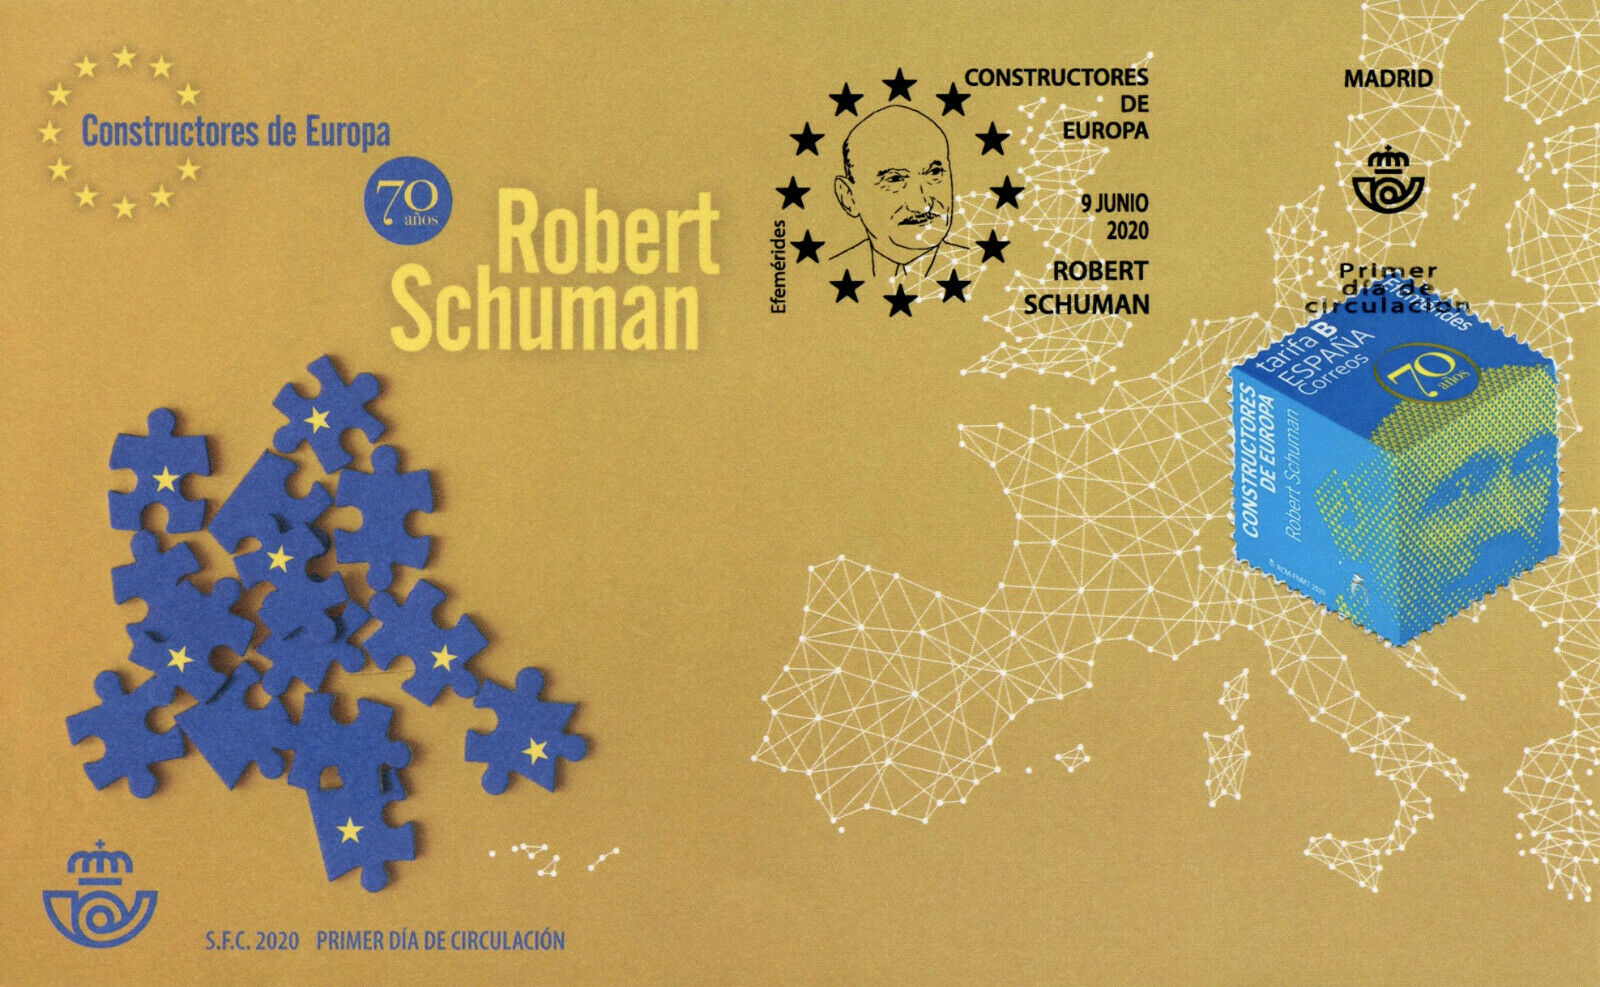 Spain Architecture Stamps 2020 FDC Robert Schuman Architects of Europe 1v Set